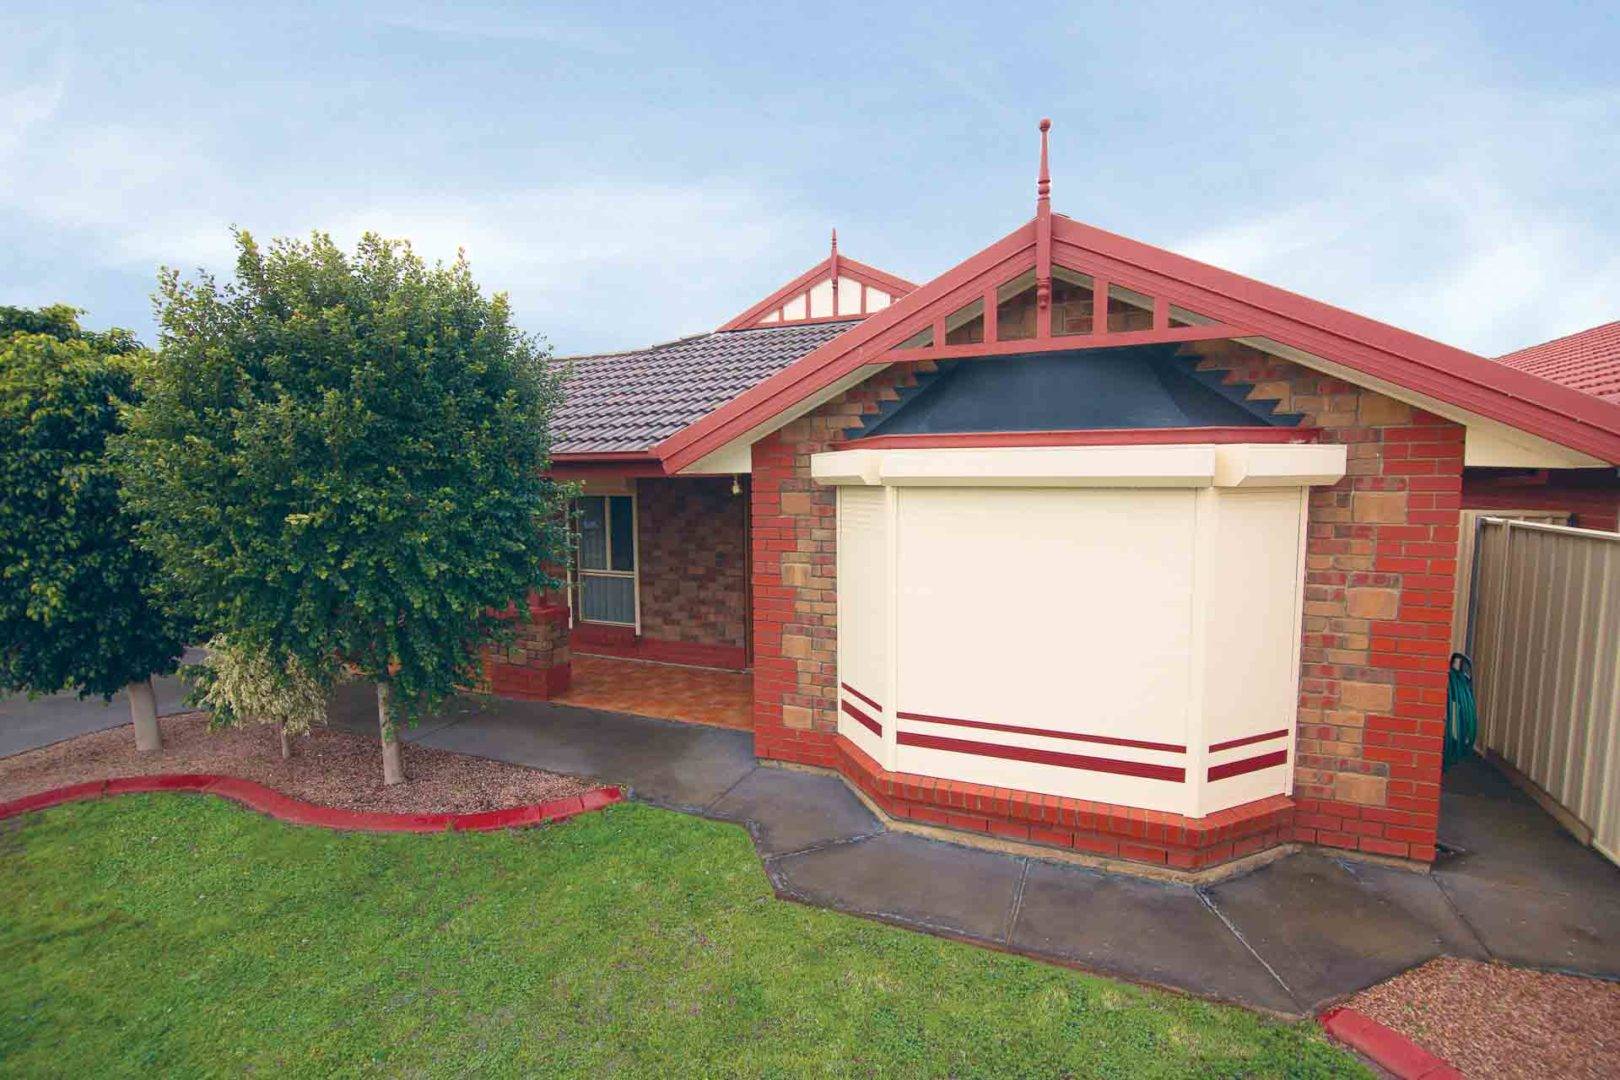 Why should I invest more on a quality set of roller shutters - Our roller shutters are Australian made, Australian Outdoor Living.